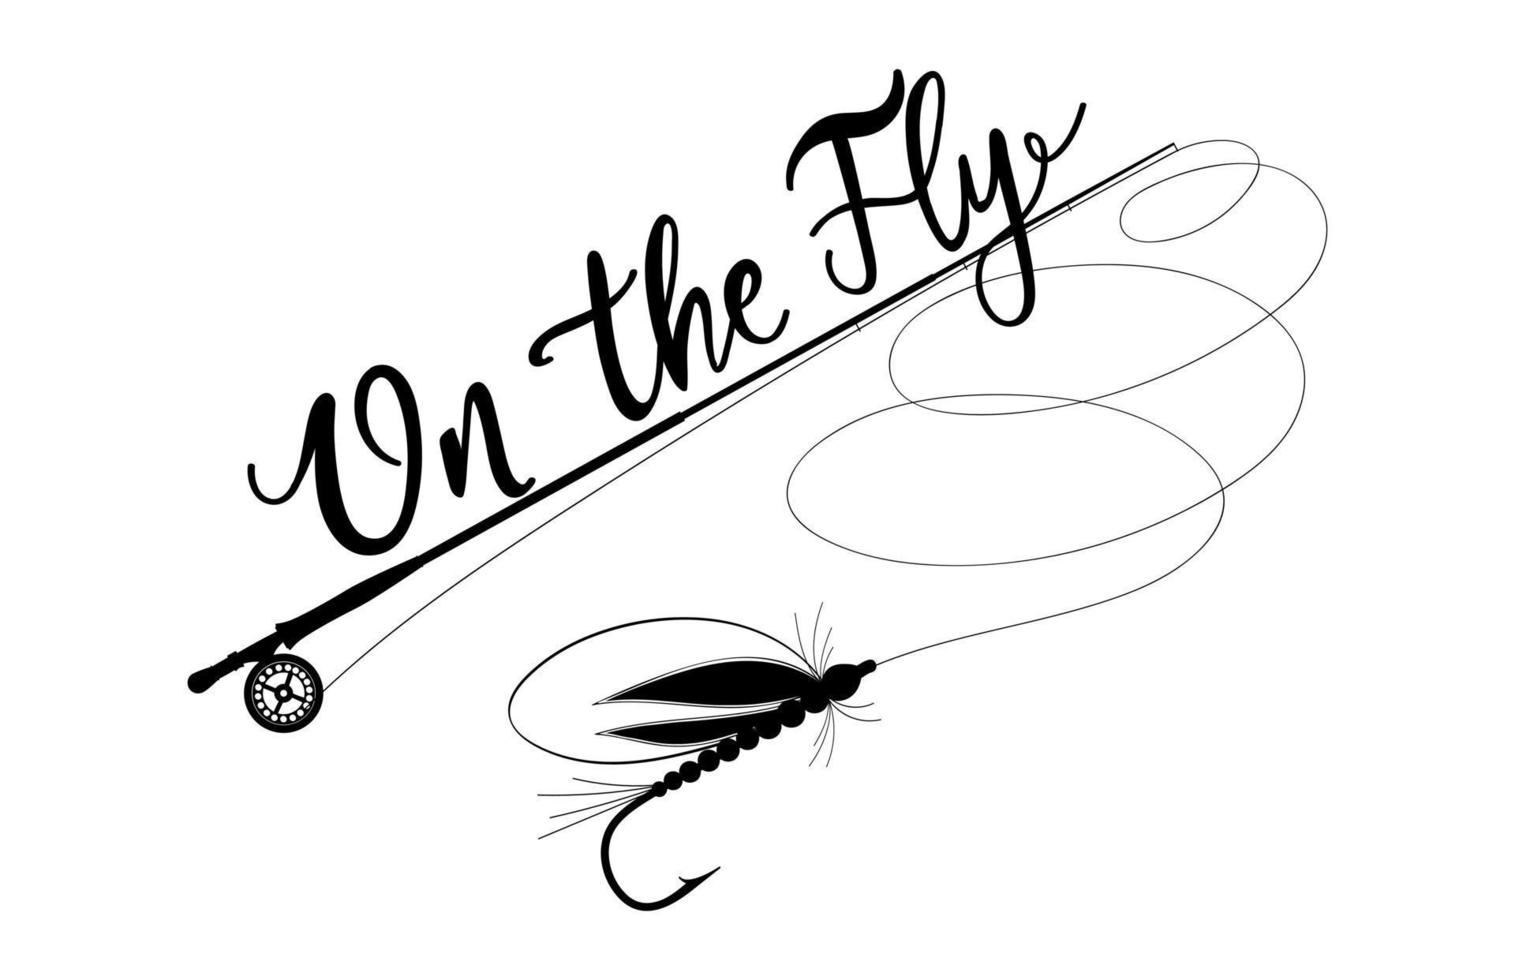 https://static.vecteezy.com/system/resources/previews/018/975/628/non_2x/on-the-fly-fishing-rod-with-fly-fishing-lure-hand-drawn-stock-fly-fishing-illustration-vector.jpg